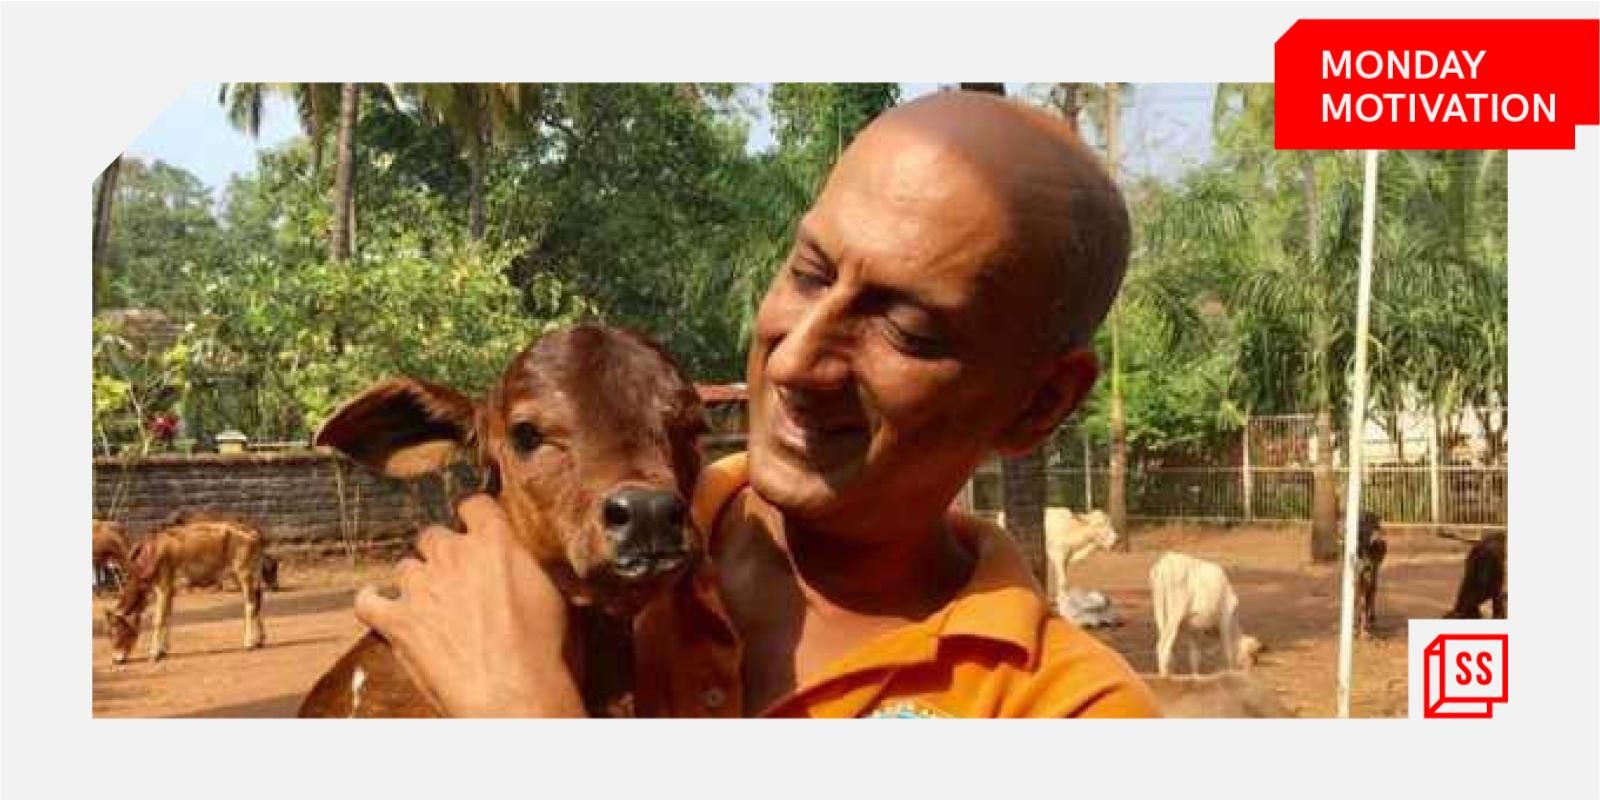 [Monday Motivation] This 58-year-old man left behind his successful business life in the UK to rescue cows in Goa